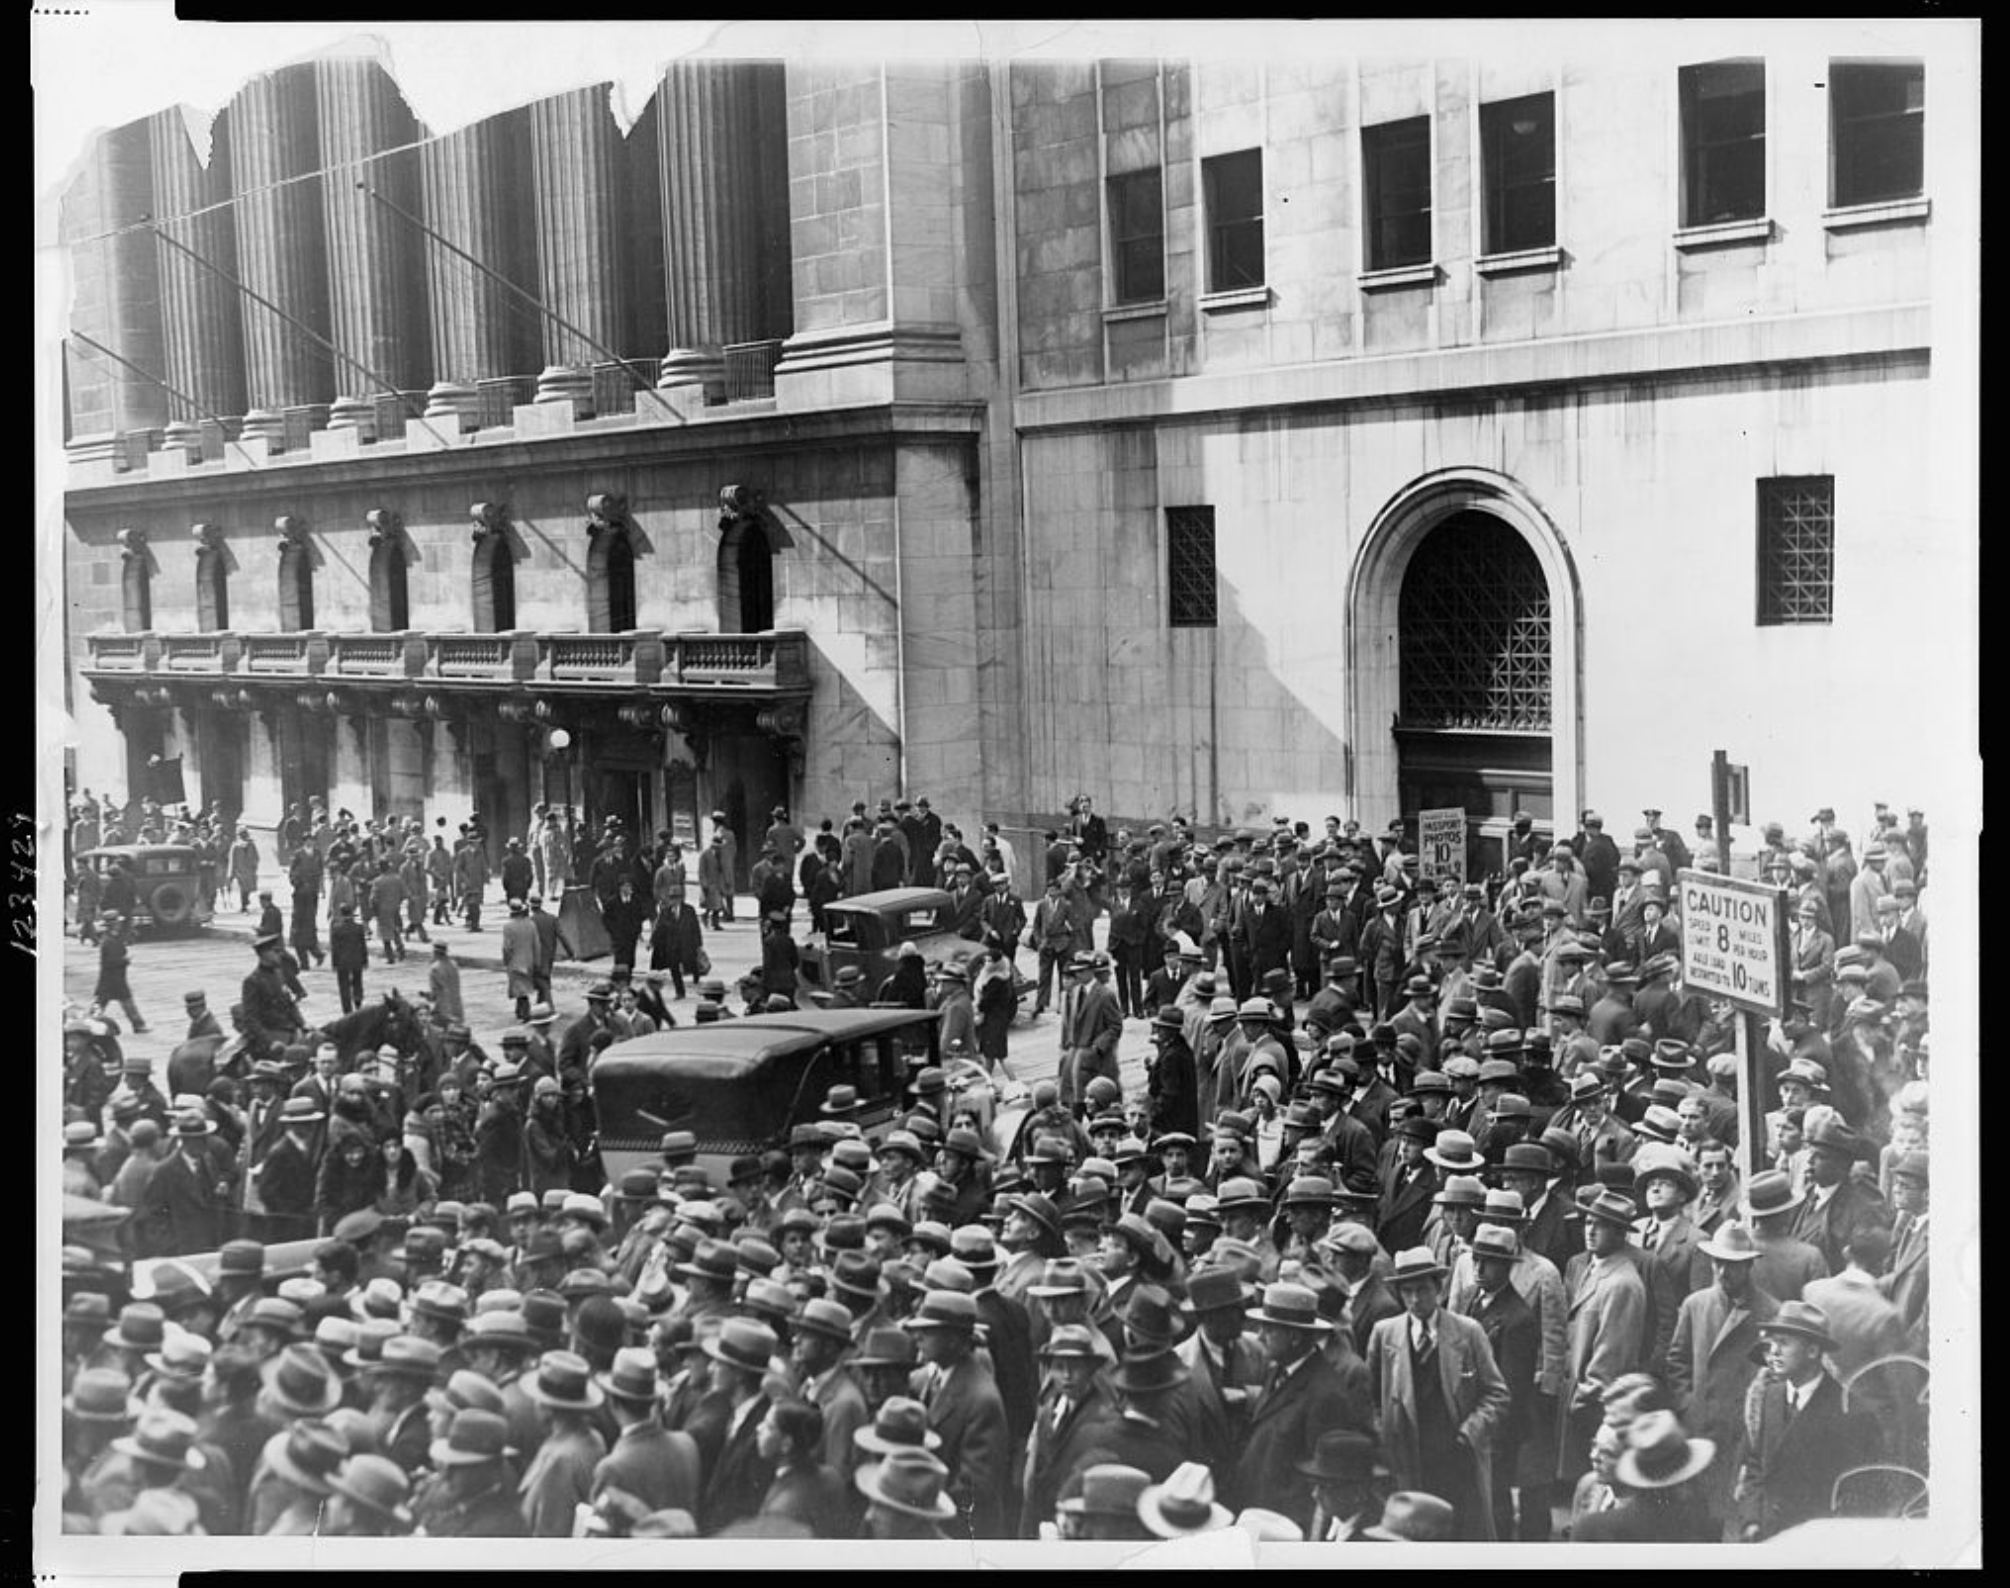 Crowd of people gather outside the New York Stock Exchange following the Crash of 1929